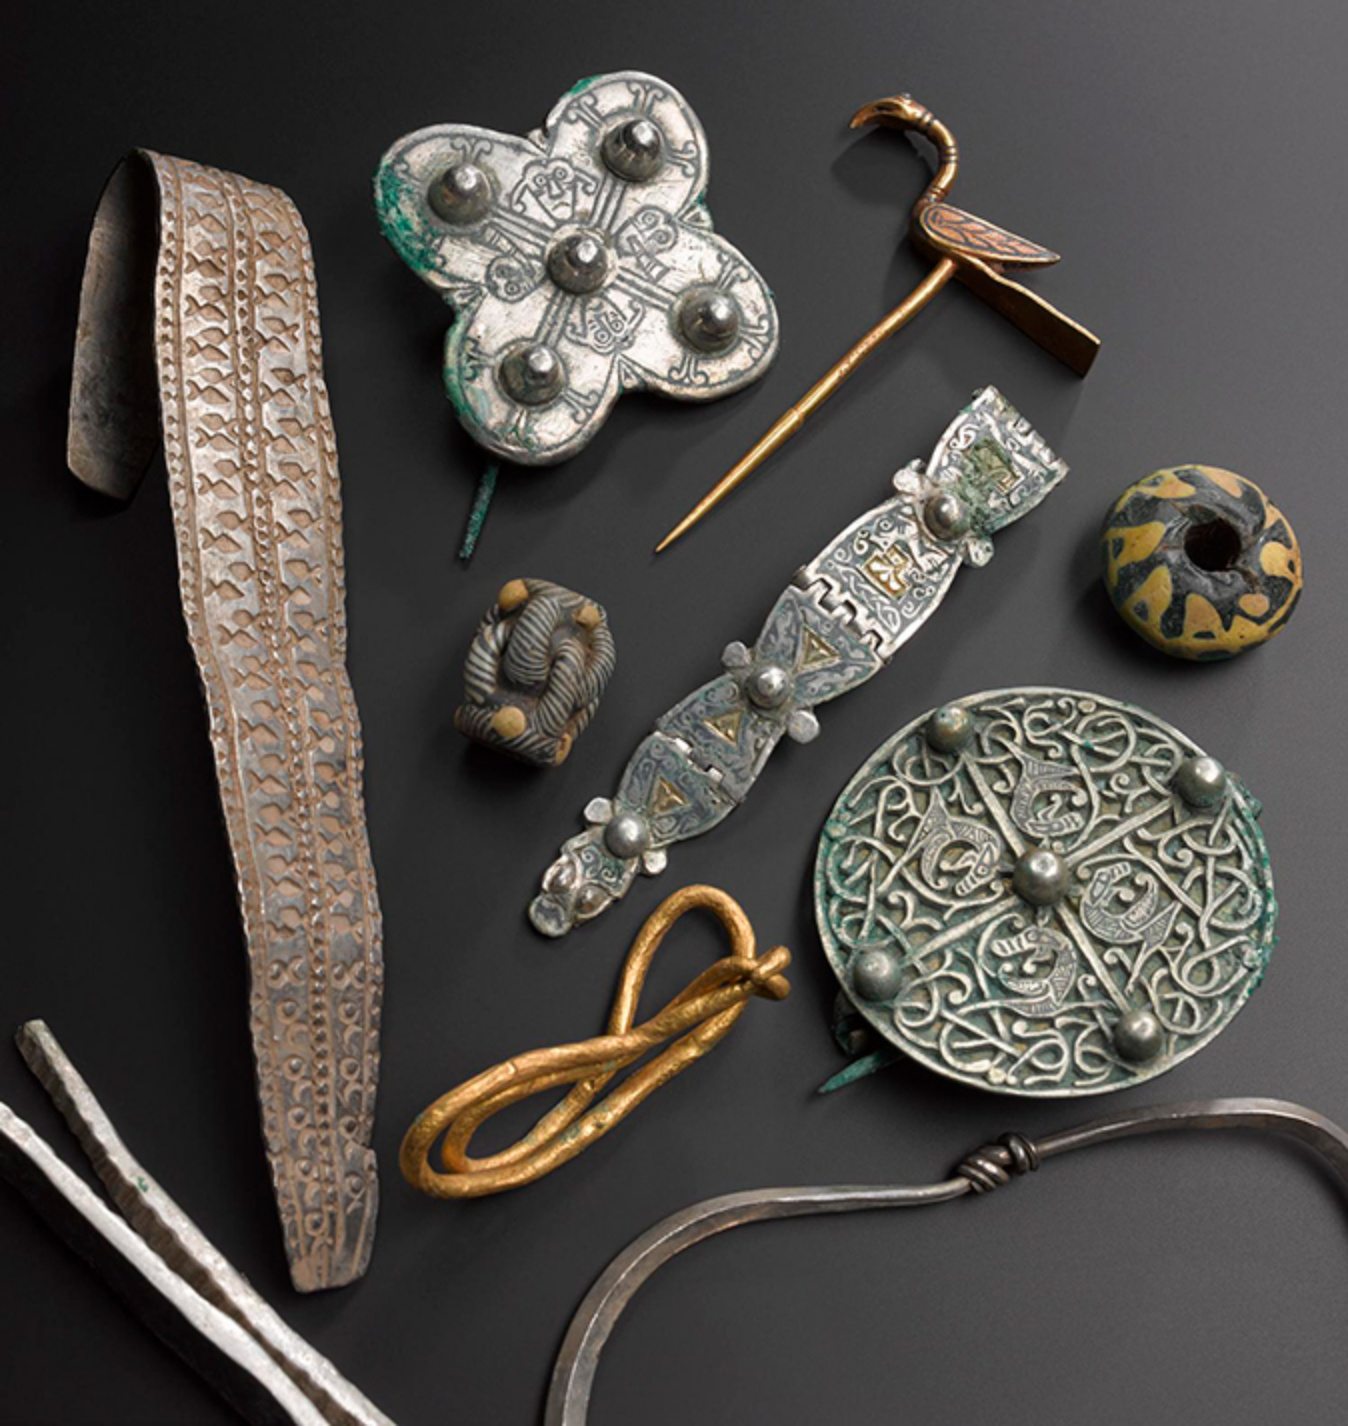 A selection of objects from the Viking age Galloway Hoard.